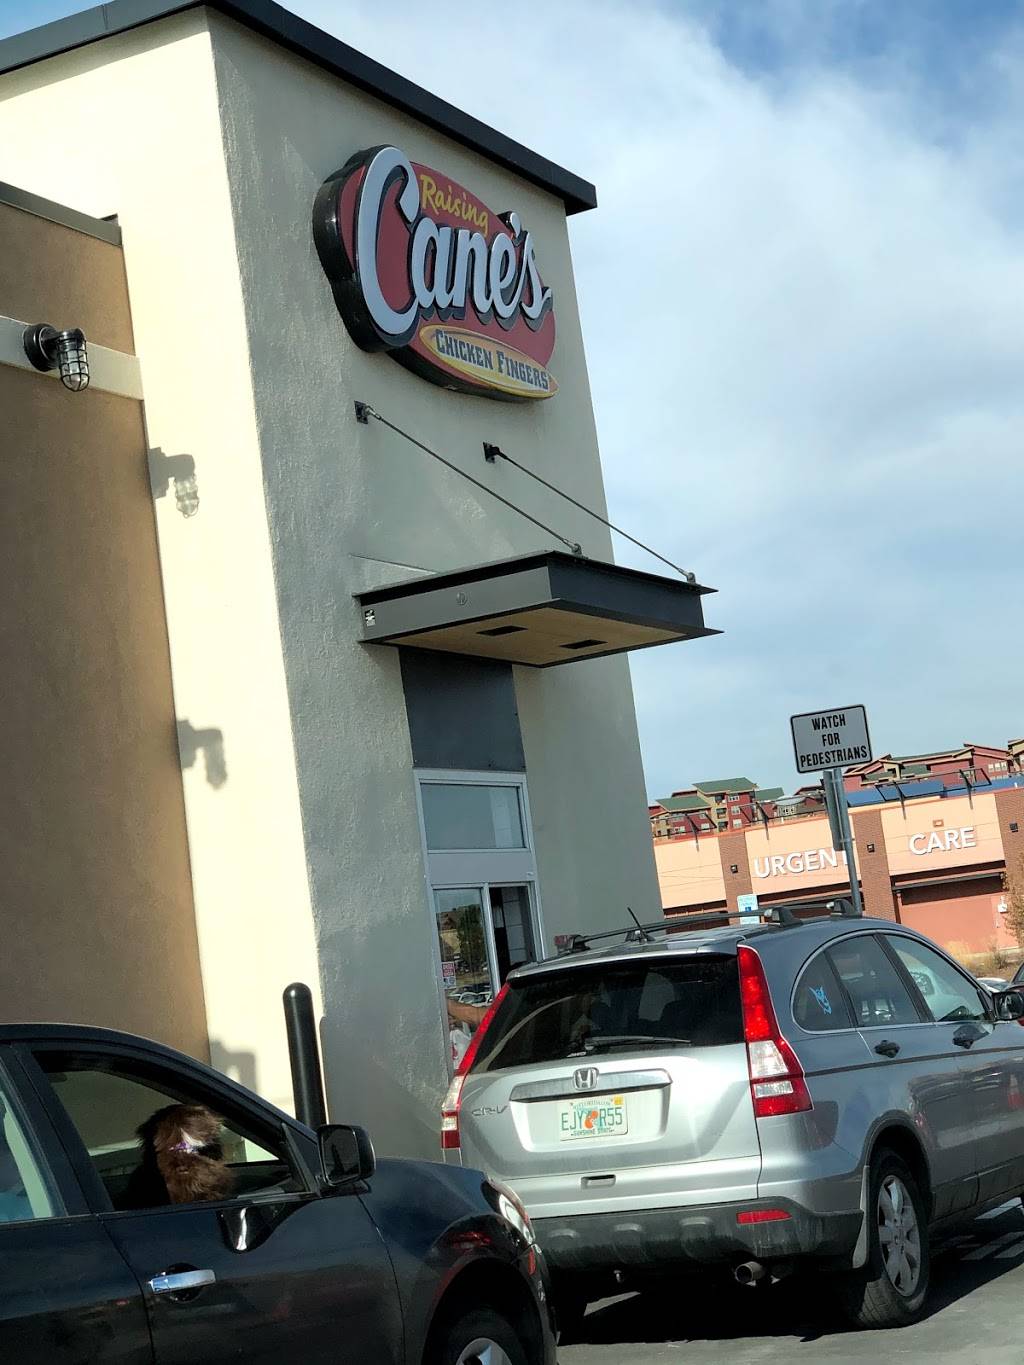 Raising Canes Chicken Fingers | meal takeaway | 18200 Cottonwood Dr, Parker, CO 80138, USA | 3038411207 OR +1 303-841-1207